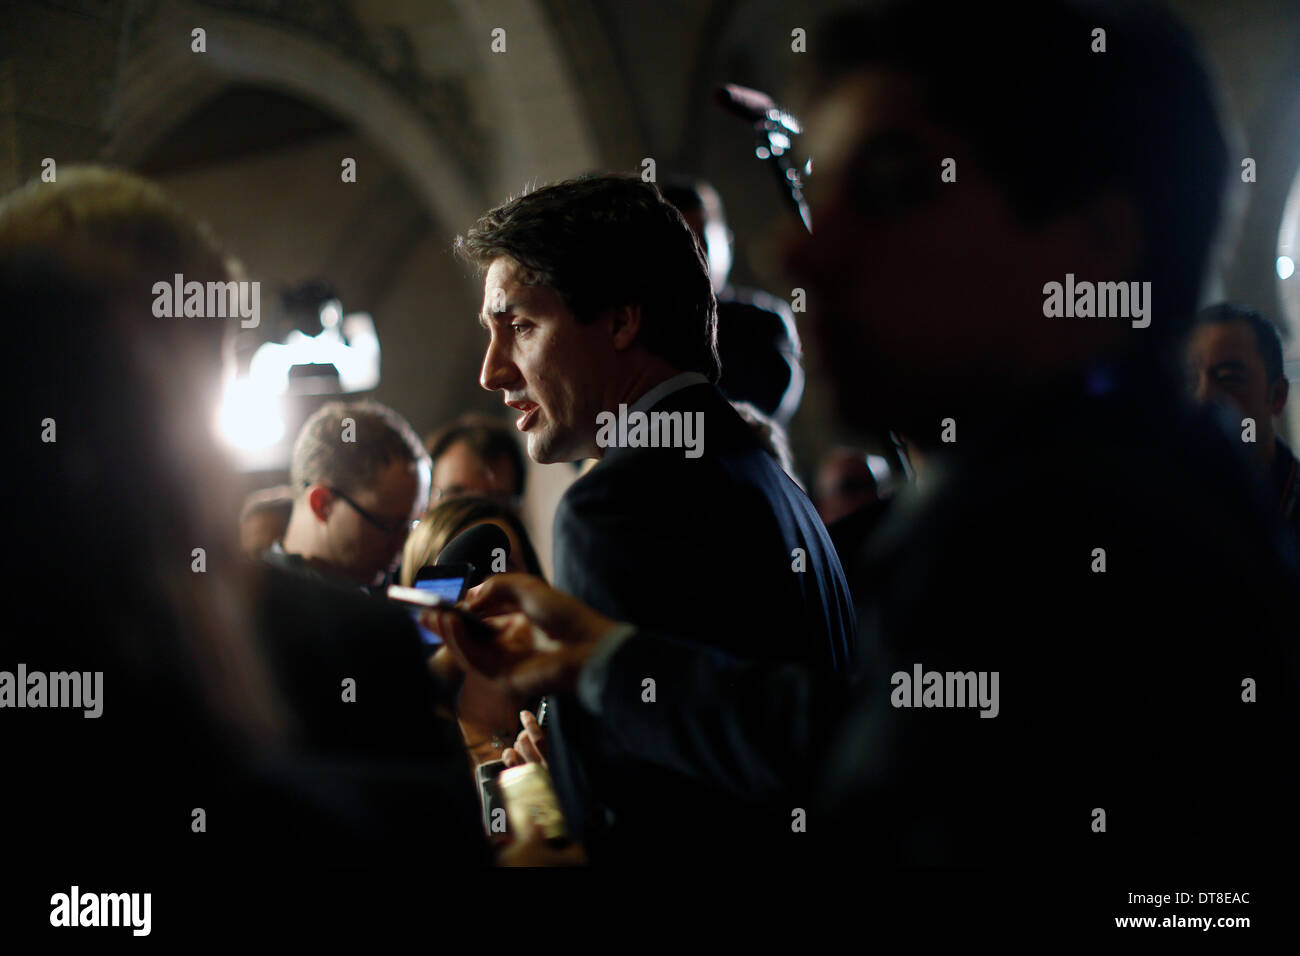 Ottawa, Canada. 11th Feb, 2014. Liberal Party leader Justin Tudeau speaks to reporters about the new federal budget, unveiled by Finance Minister Jim Flaherty at Parliament Hill in Ottawa, Canada, Feb. 11, 2014. Jim Flaherty on Tuesday unveiled a federal budget projecting a surplus in 2015. © David Kawai/Xinhua/Alamy Live News Stock Photo